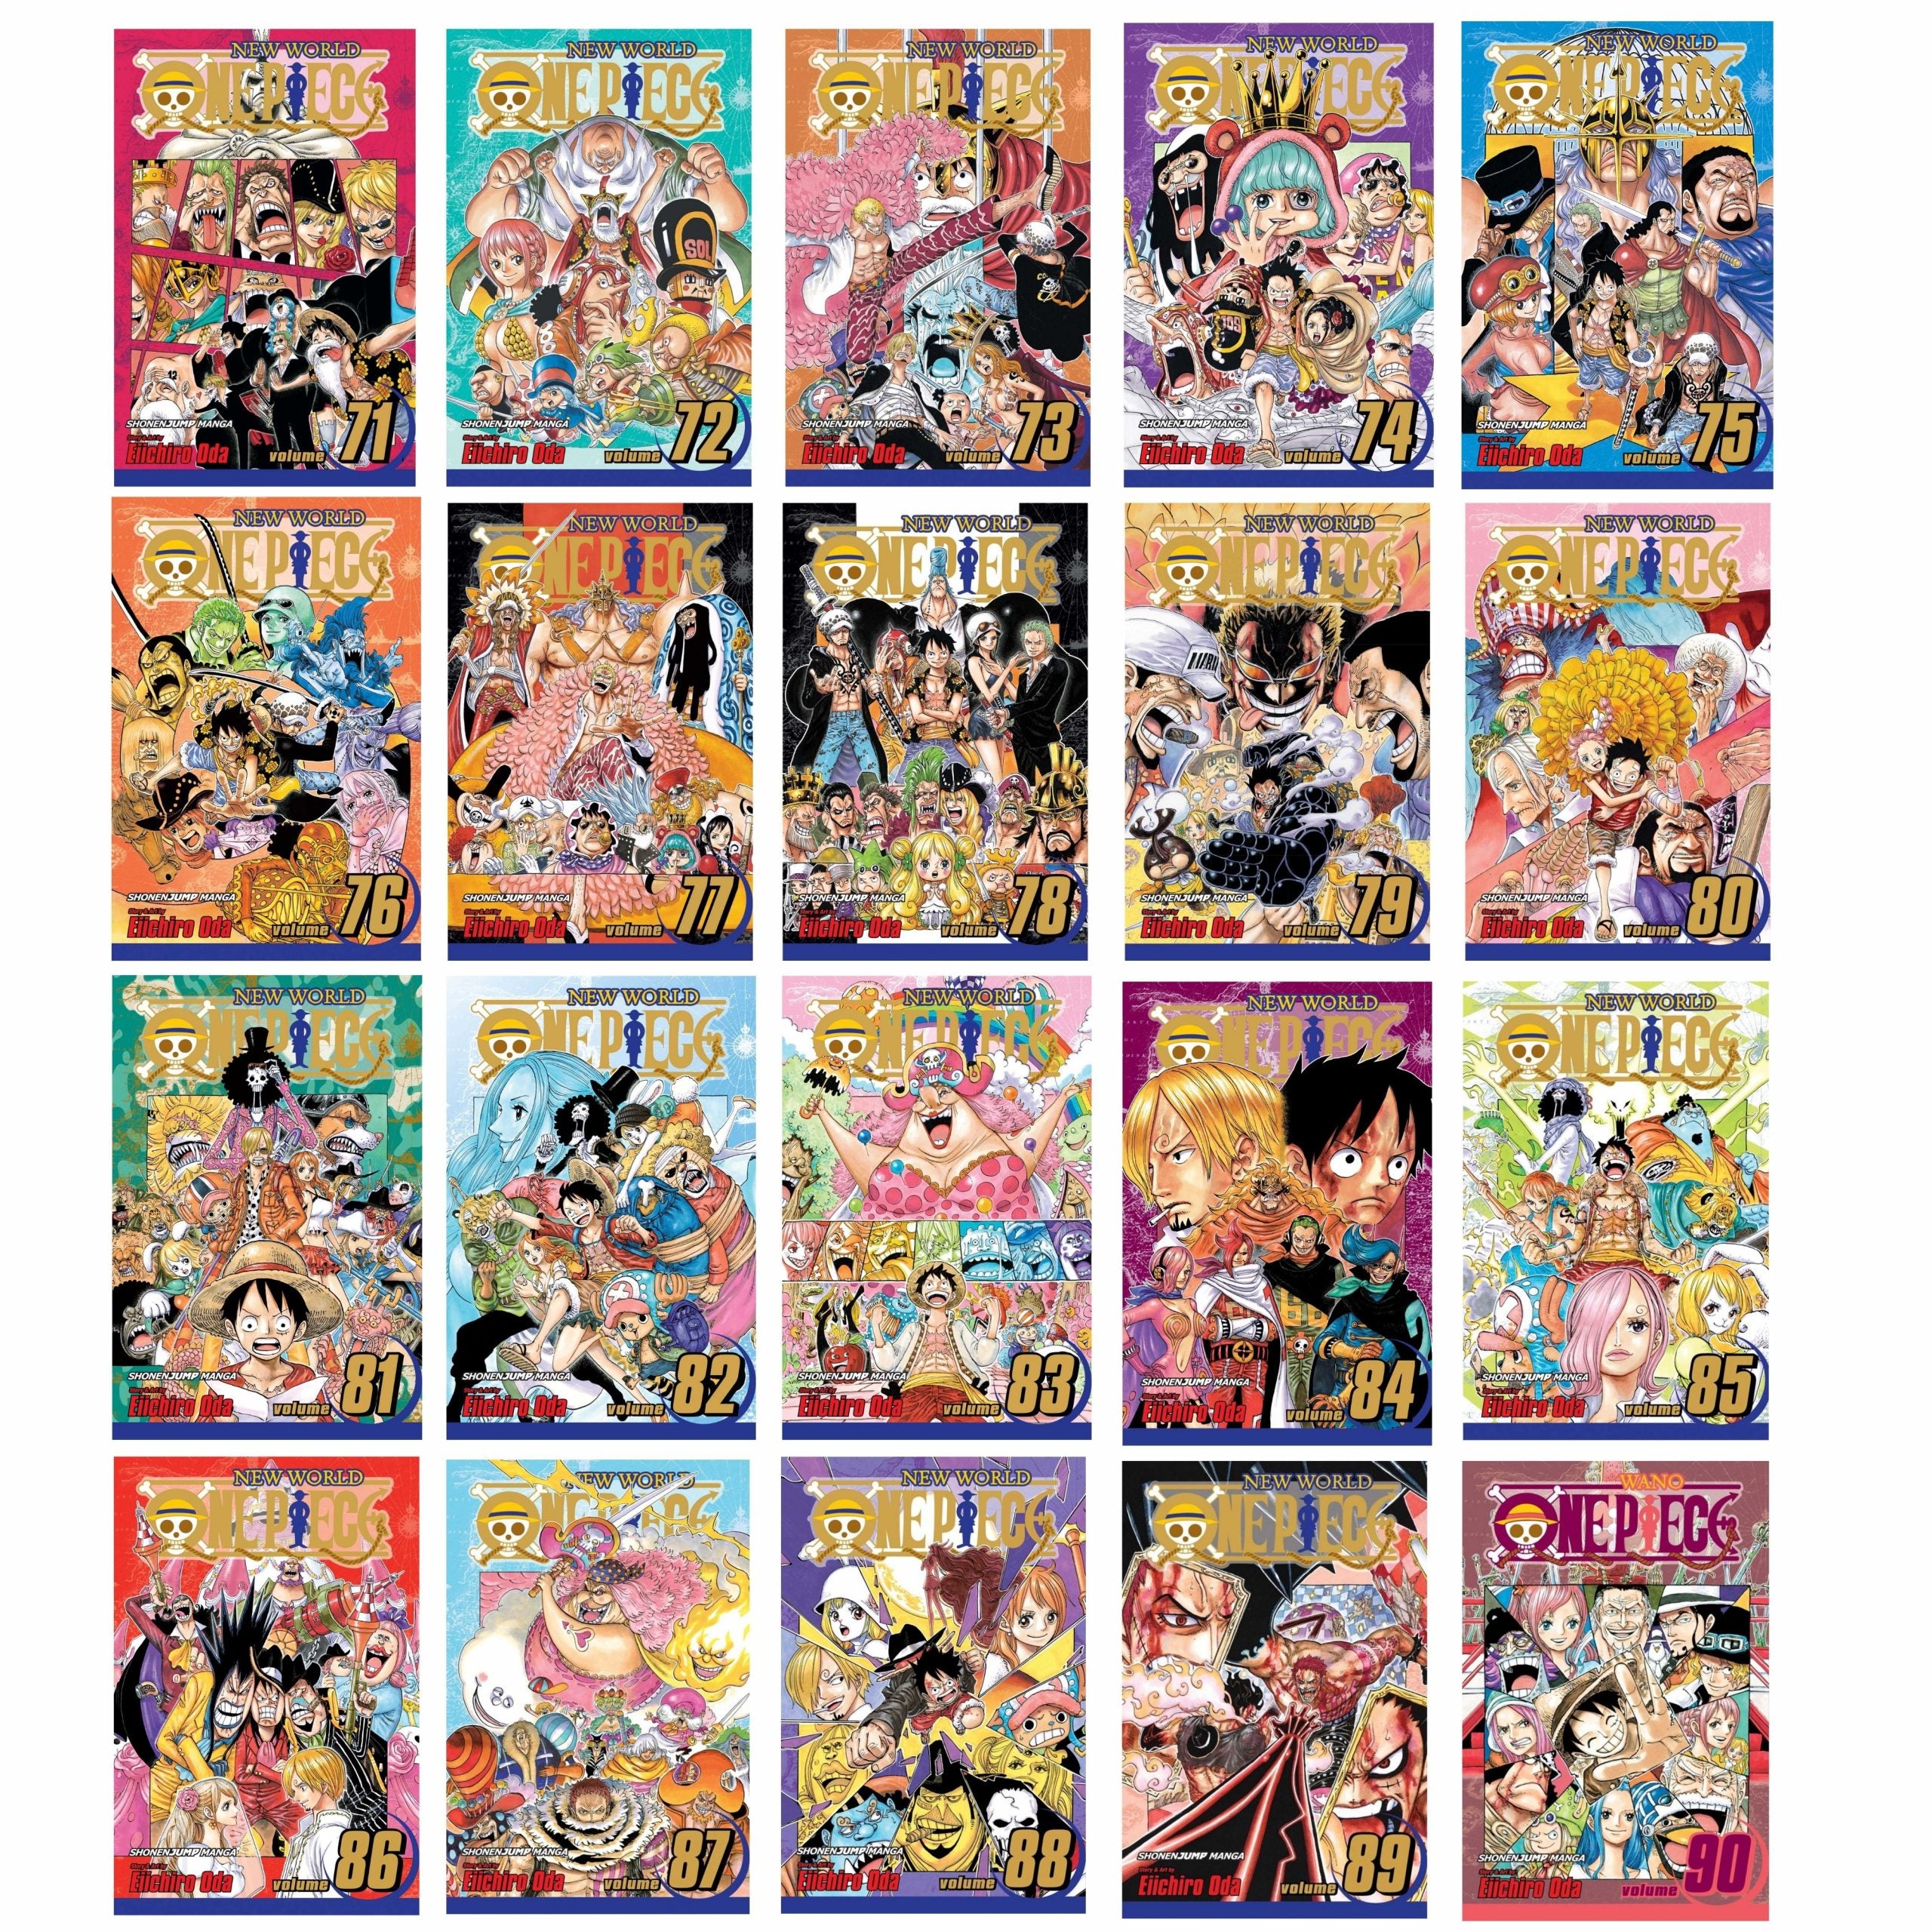 /wp-content/uploads/one-piece-volumes.